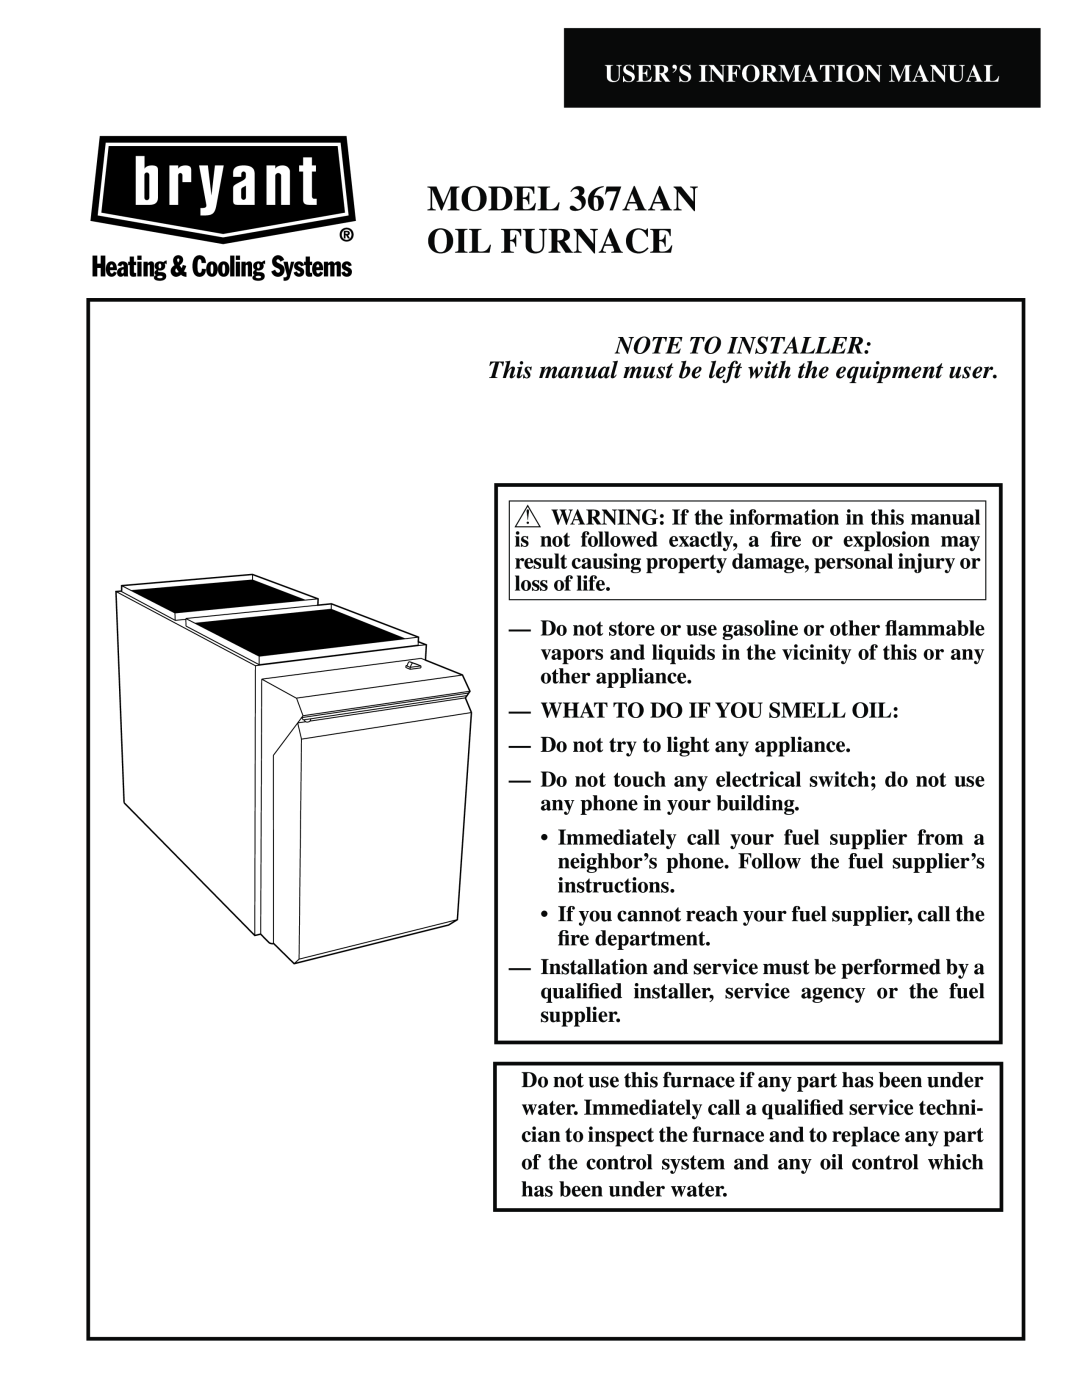 Bryant 367AAN warranty Sizes, Series A, Form No. PDS 367A.105.2, Low-Boy Oil Furnace, Features 